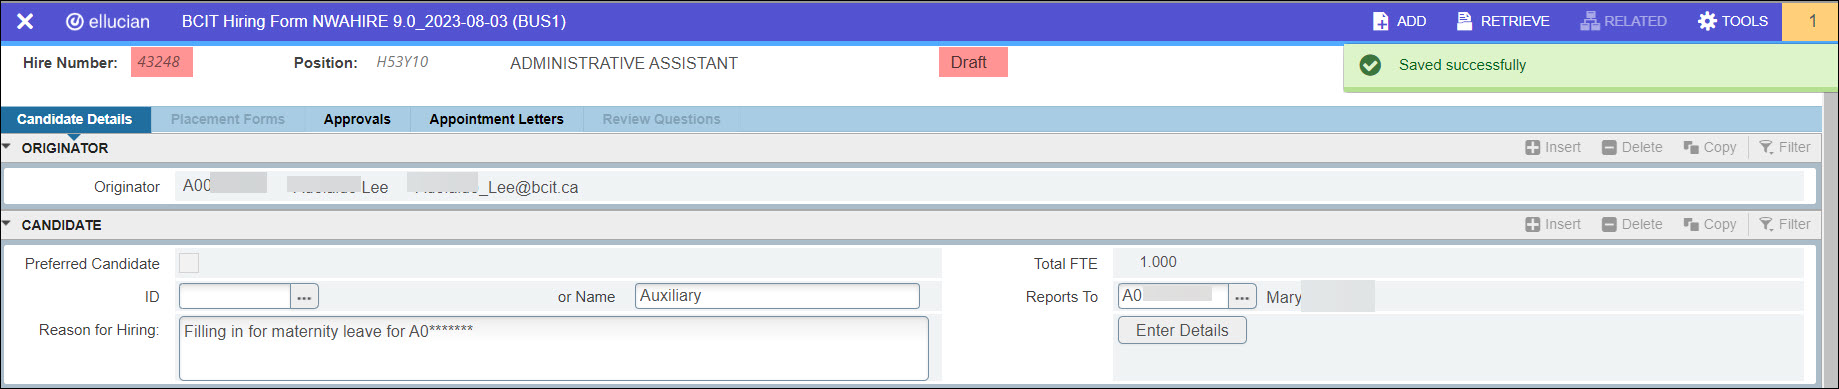 Screenshot Banner NWAHIRE Saved Successfully show Hire Number and Draft status